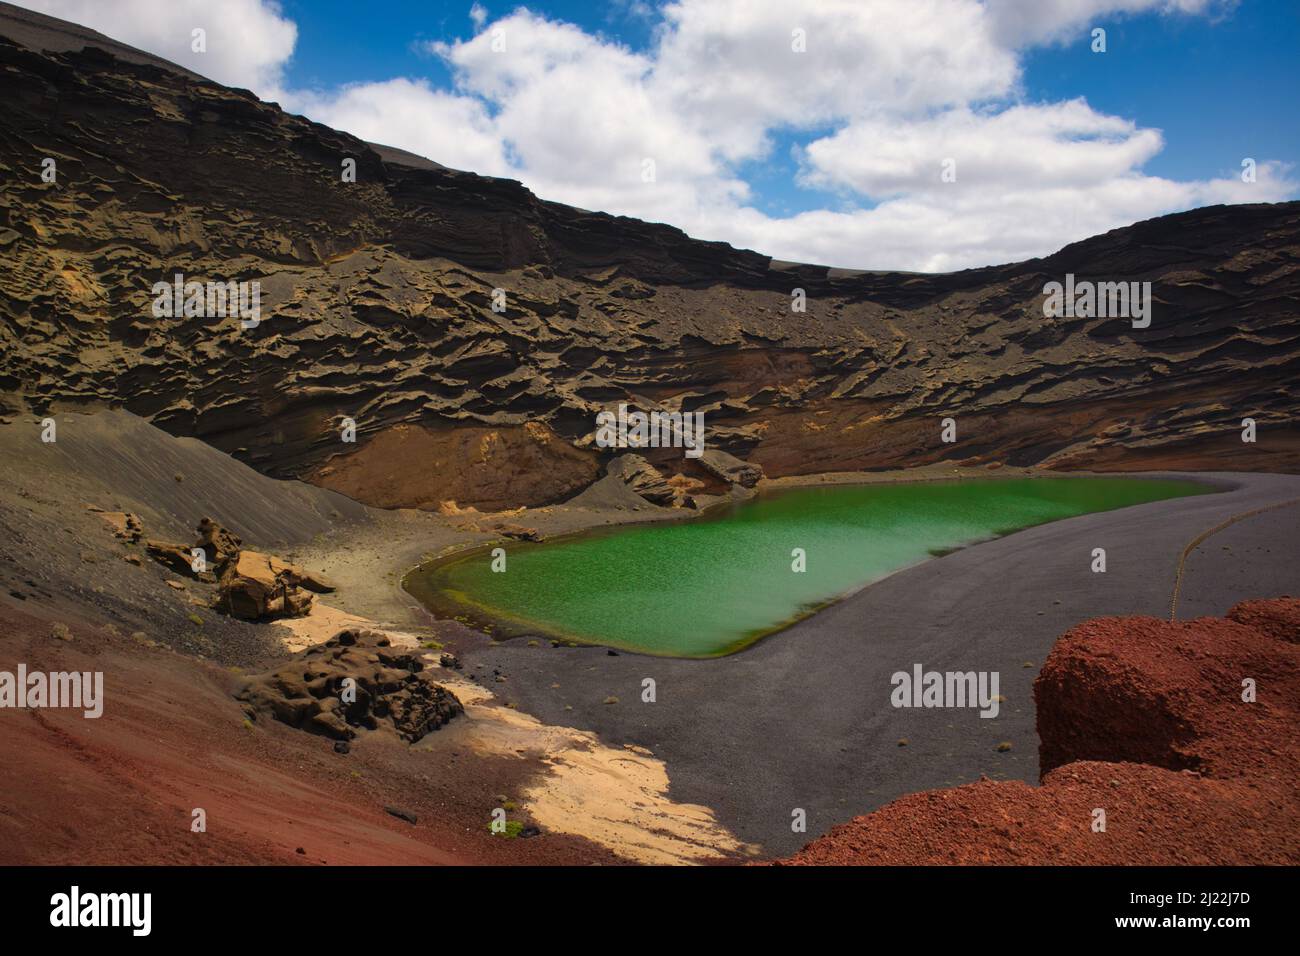 The Green Lagoon in Lanzarote. El Golfo is a lake of an unusual green color on the island of Lanzarote, formed in the crater of an old volcano and it Stock Photo